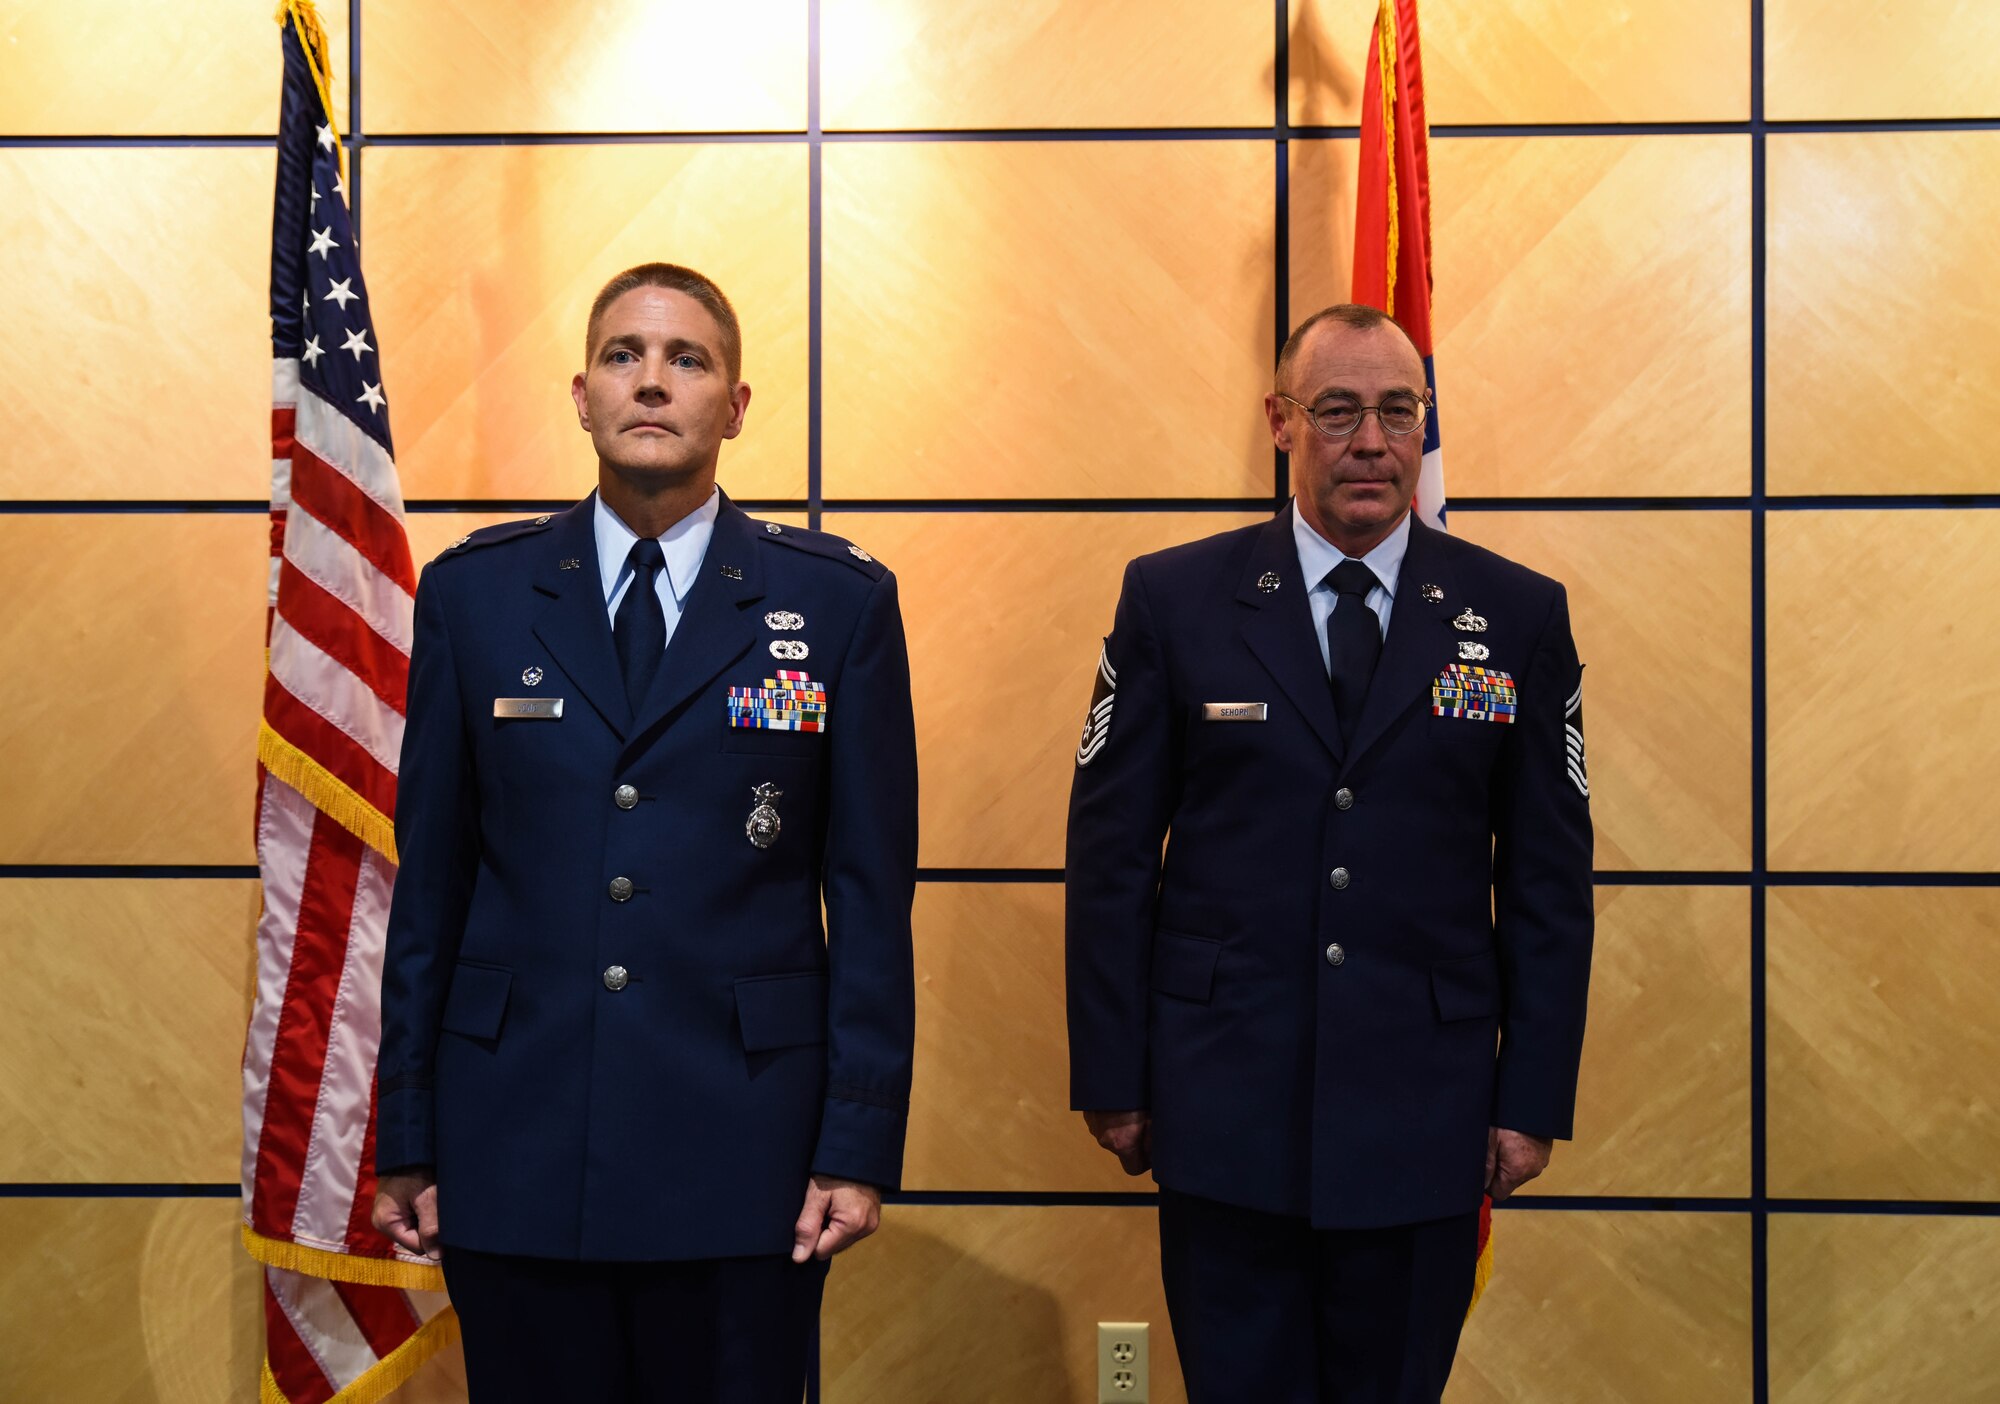 Lt. Col. Mitch Long, 188th Mission Support Group deputy commander, and Chief Master Sgt. Ricky Sehorn, chief of transportation, stand at attention for orders to promote Sehorn to chief master sergeant at a ceremony June 4, 2016, at Ebbing Air National Guard Base, Fort Smith, Ark. Sehorn has served in vehicle maintenance for the past 24 years and has been chief of transportation since 2014. (U.S. Air National Guard photo by Senior Airman Cody Martin/Released)